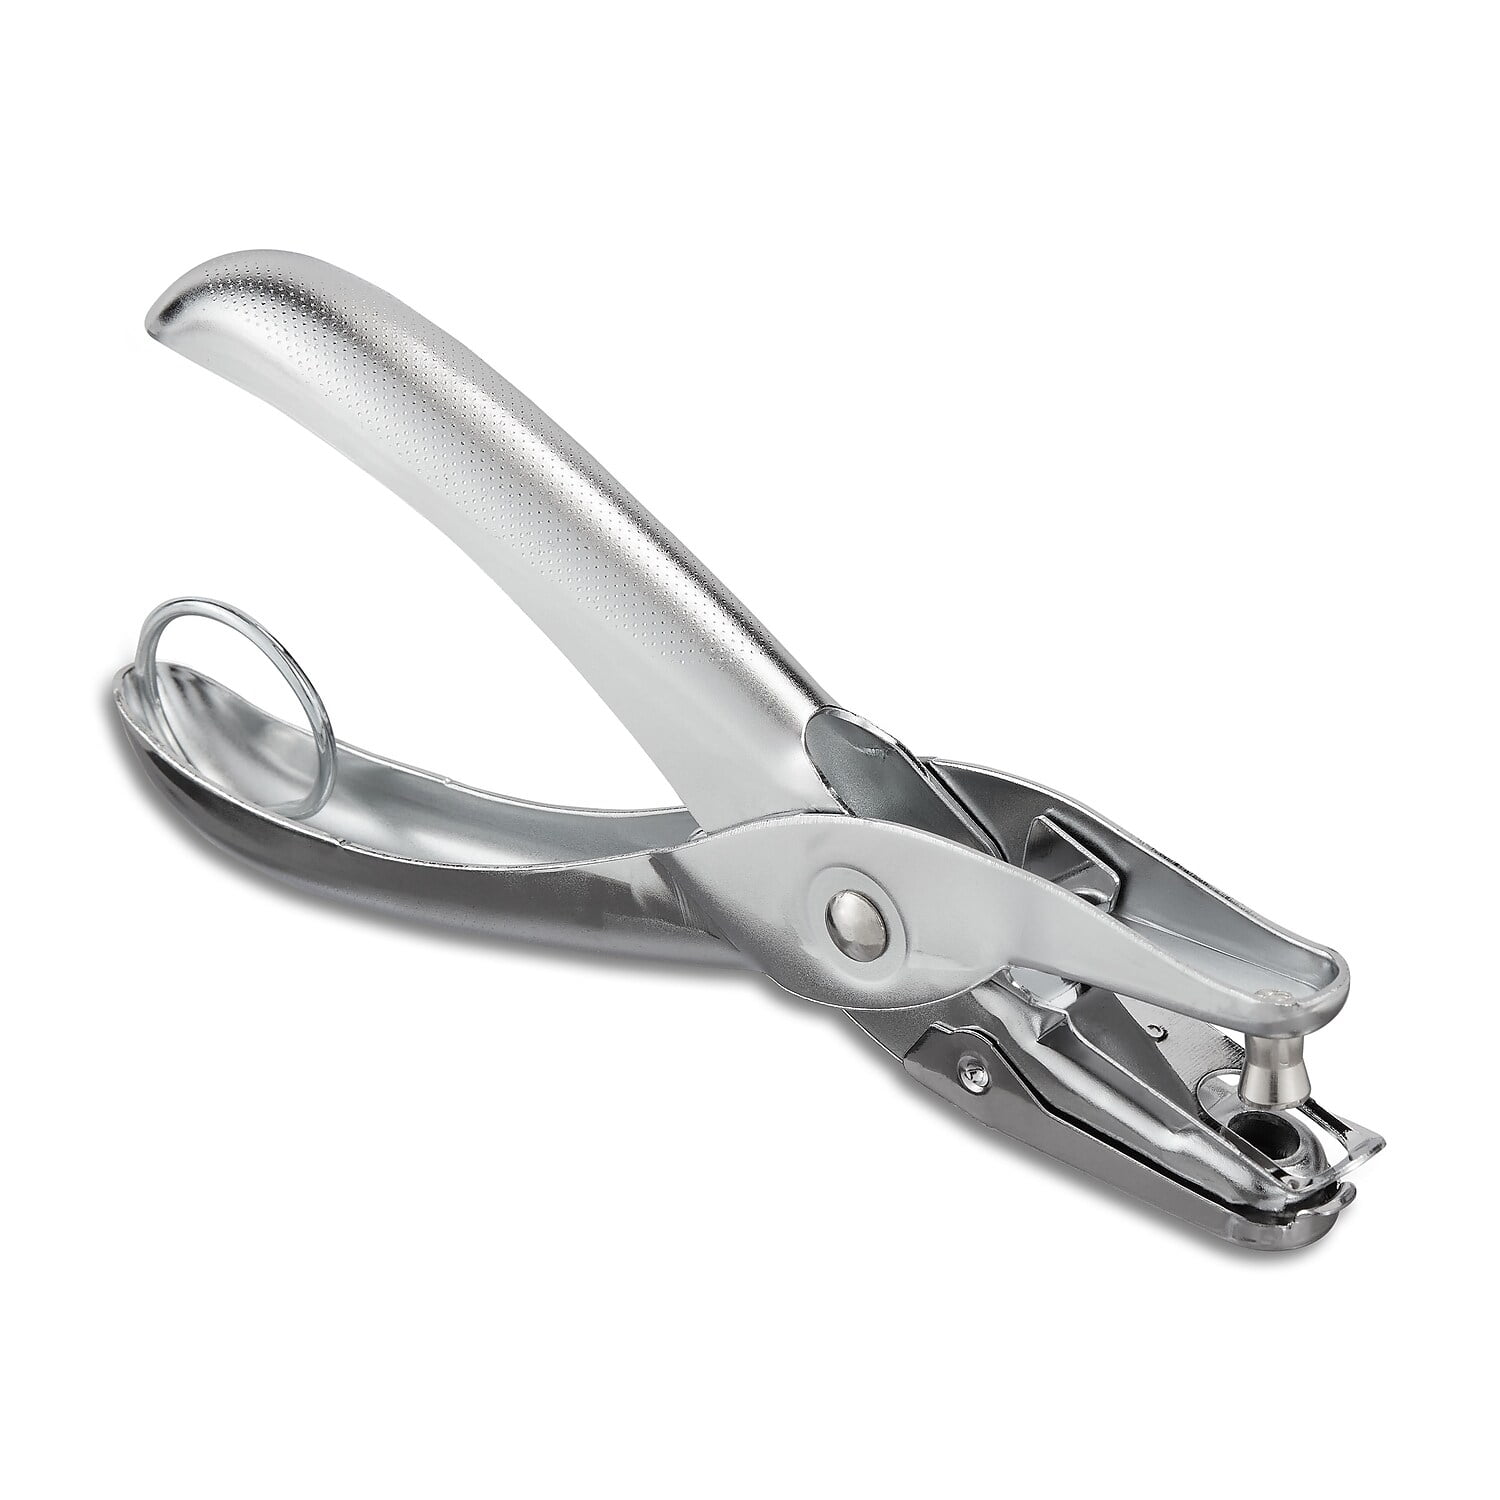  Hole Punch 1 Count, Single Hole Punch Silver Color Hole Puncher,  Paper Punch : Arts, Crafts & Sewing